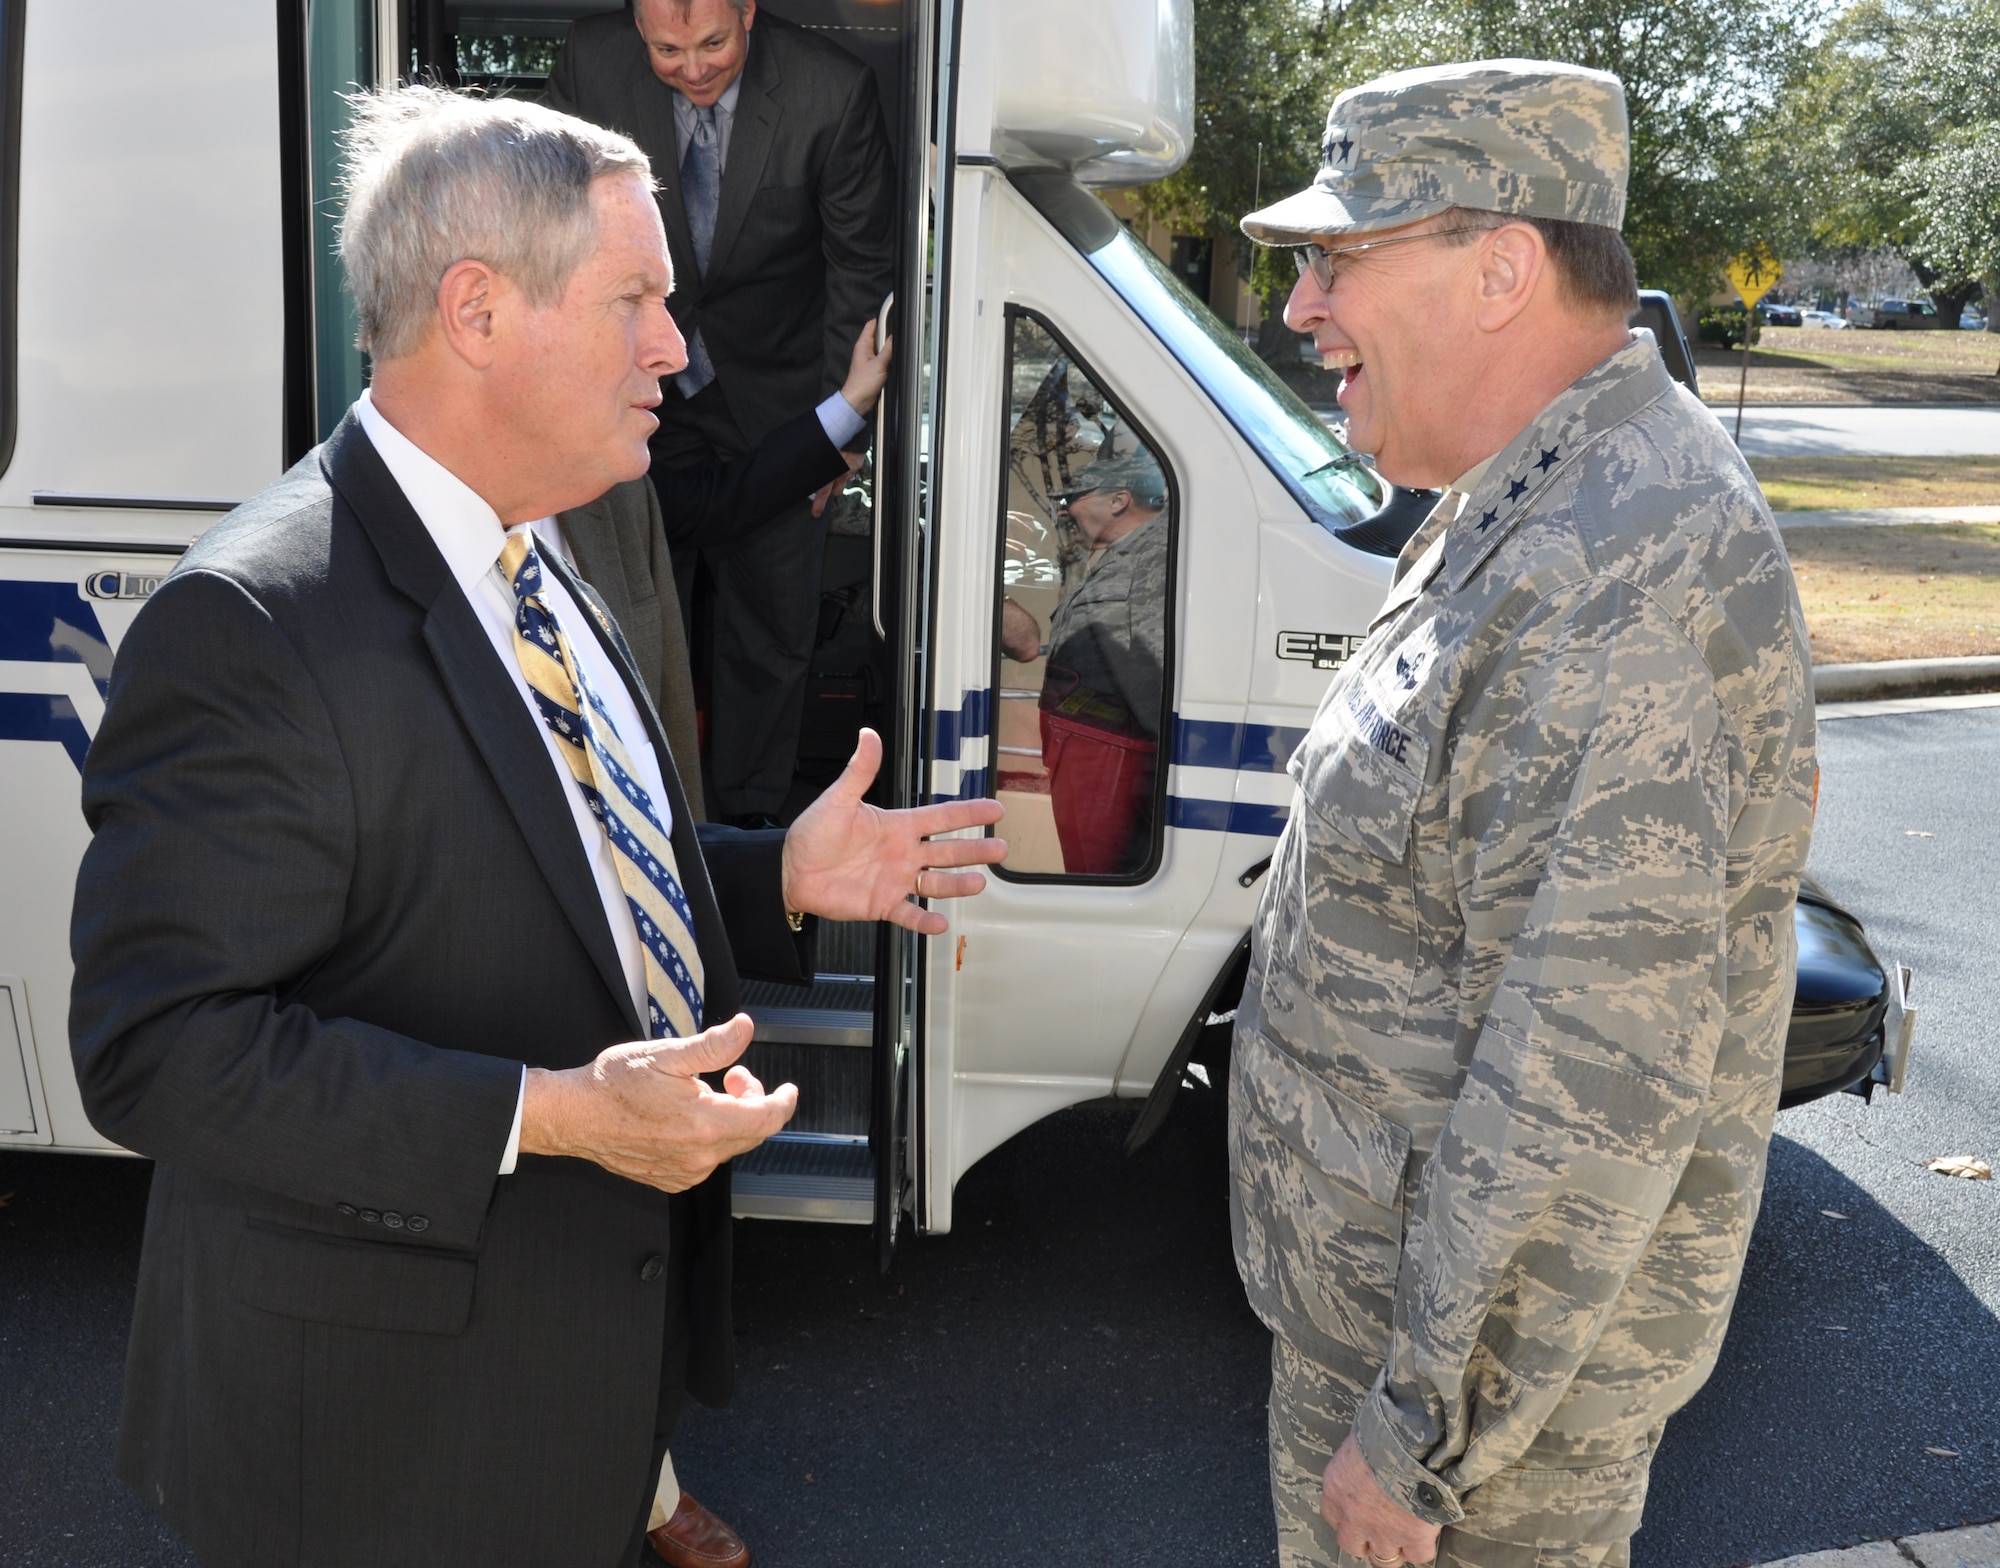 Lt. Gen. Charles E. Stenner Jr. commander of Air Force Reserve Command, welcomes U.S. Rep. Joe Wilson in front of the AFRC headquarters at Robins Air Force Base, Ga., Jan. 12, 2012. Wilson represents South Carolina’s 2nd Congressional District and is a member of the House Armed Services Committee. He visited the headquarters to discuss the AFRC Force Generation Center, last year’s operational accomplishments and the priorities for fiscal 2013. (U.S. Air Force photo/Peter Chadwick)